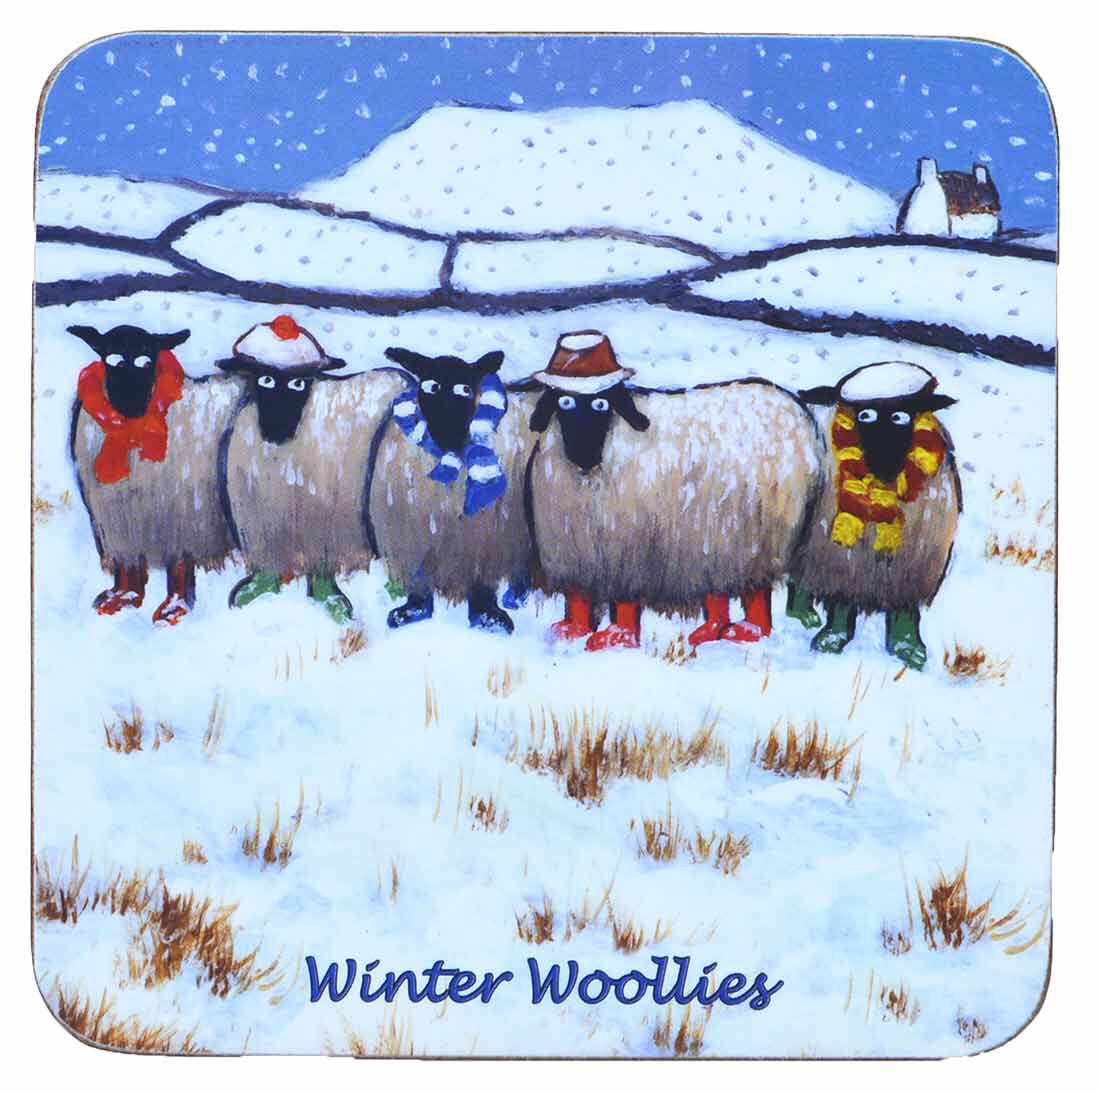 Irish Coaster With Five Sheep With Hats And Scarves And Text “Winter Woollies”